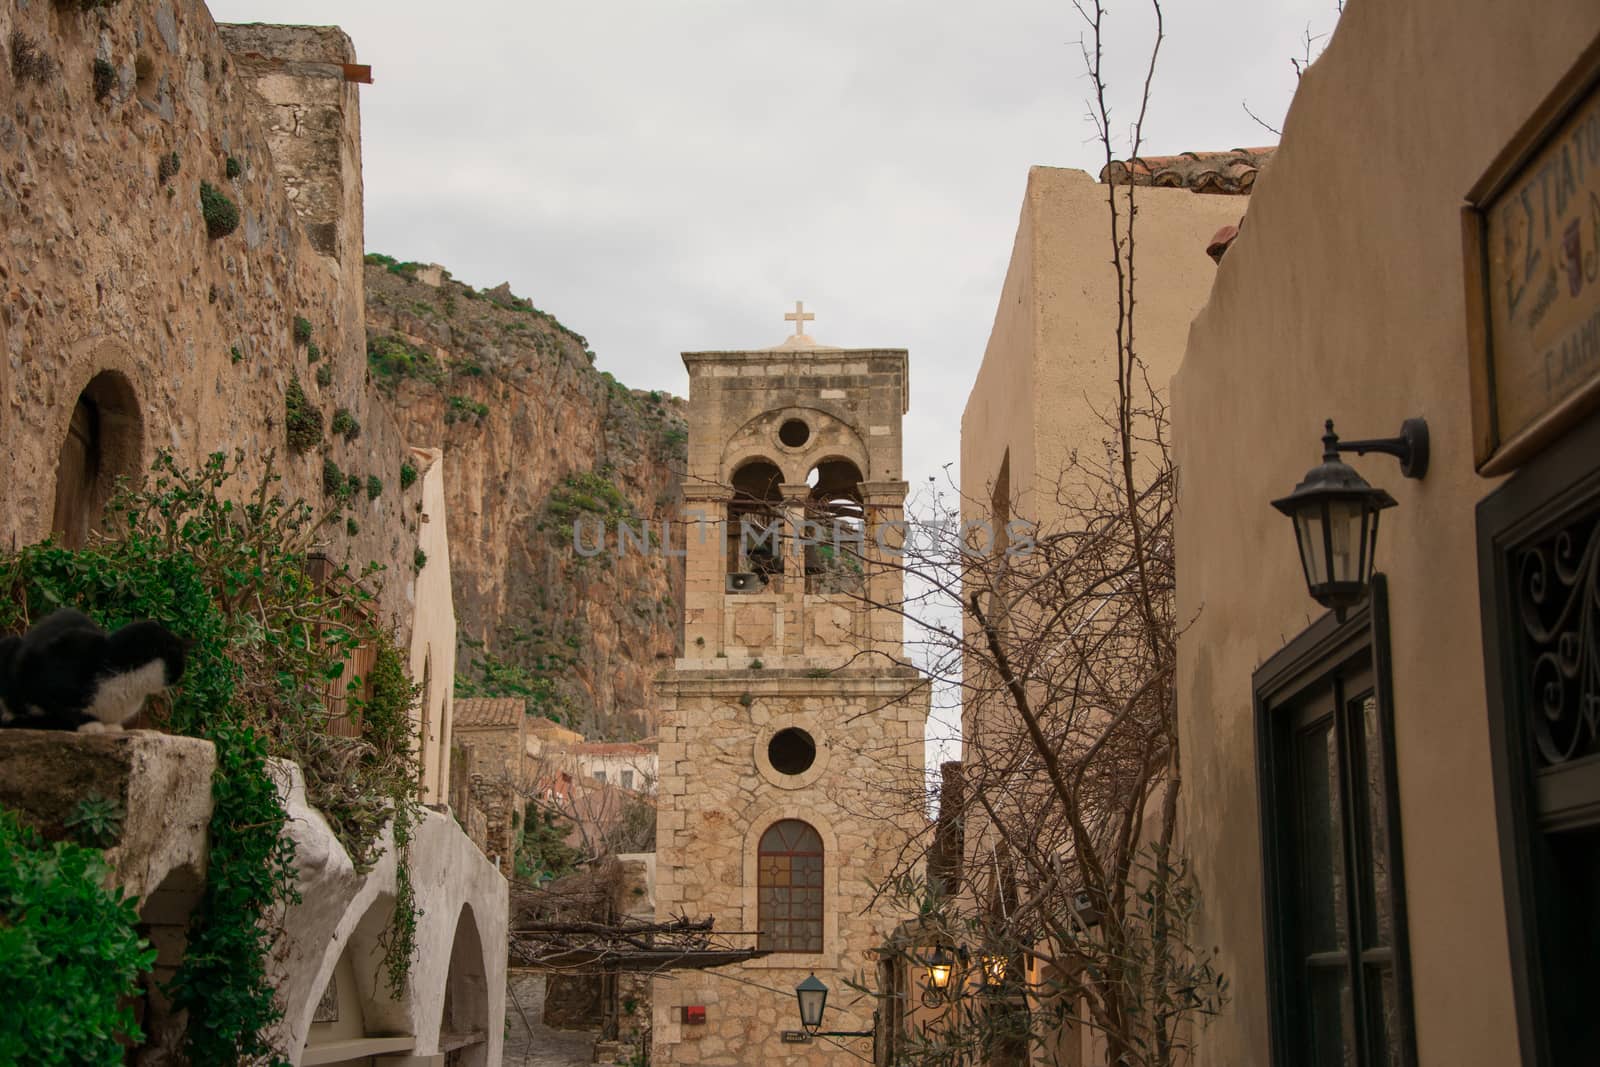 Distant view of a steeple in Monemvasia, Greece